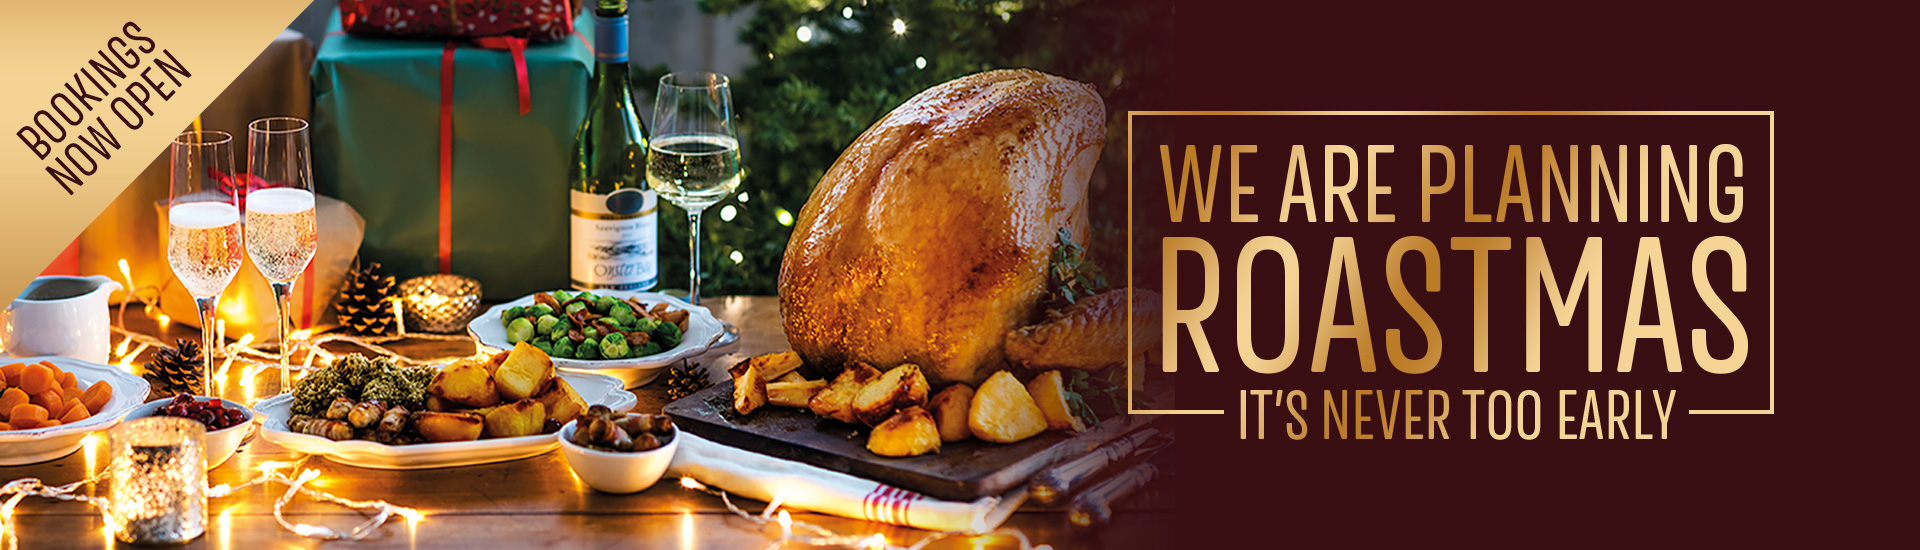 Christmas 2022 at your local Toby Carvery Cleadon Village | Home of the Roast